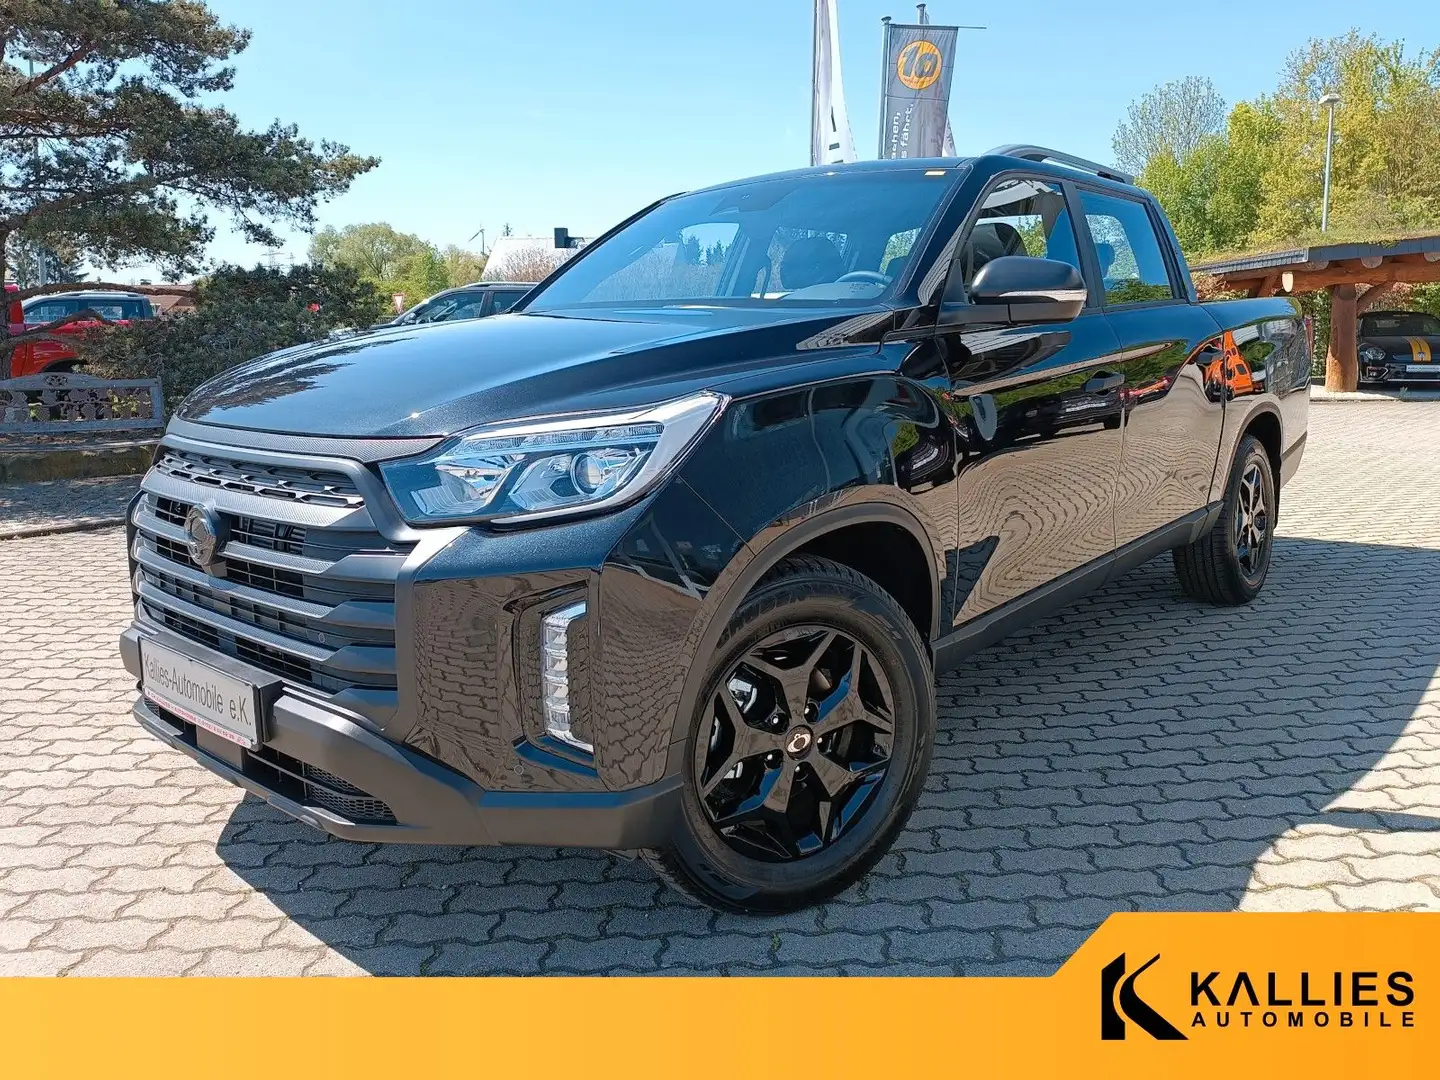 SsangYong Musso Musso 2.2d 202PS AT 4x4 LEDER+XENON+SD+DIF Schwarz - 1